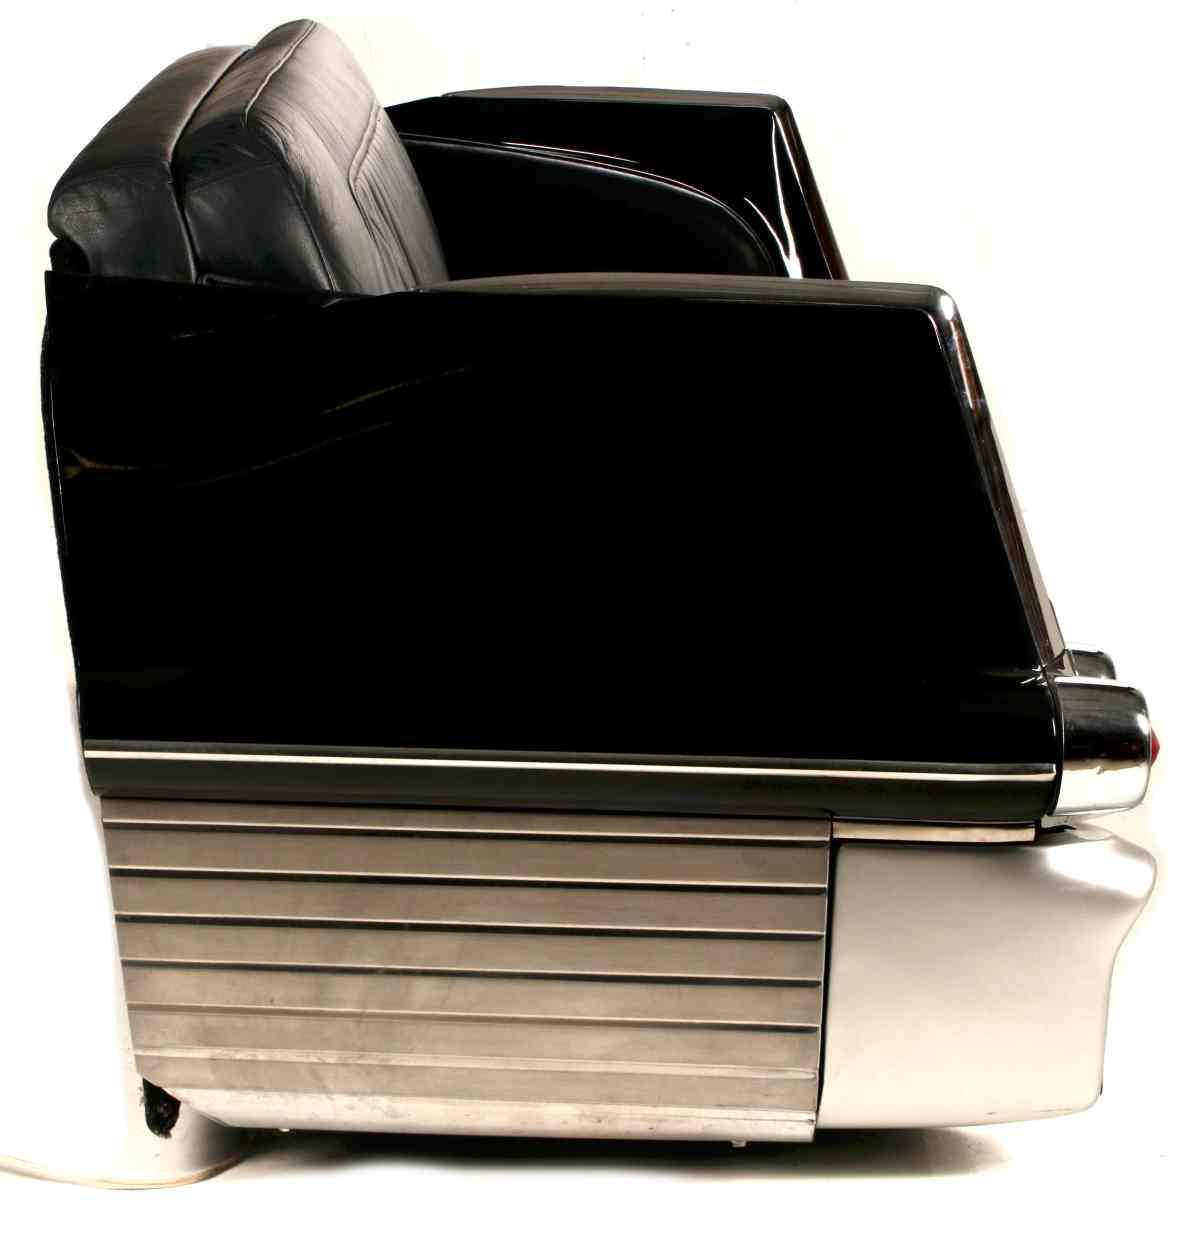 A LIGHTED 1957 CADILLAC TAIL END MODEL SOFA